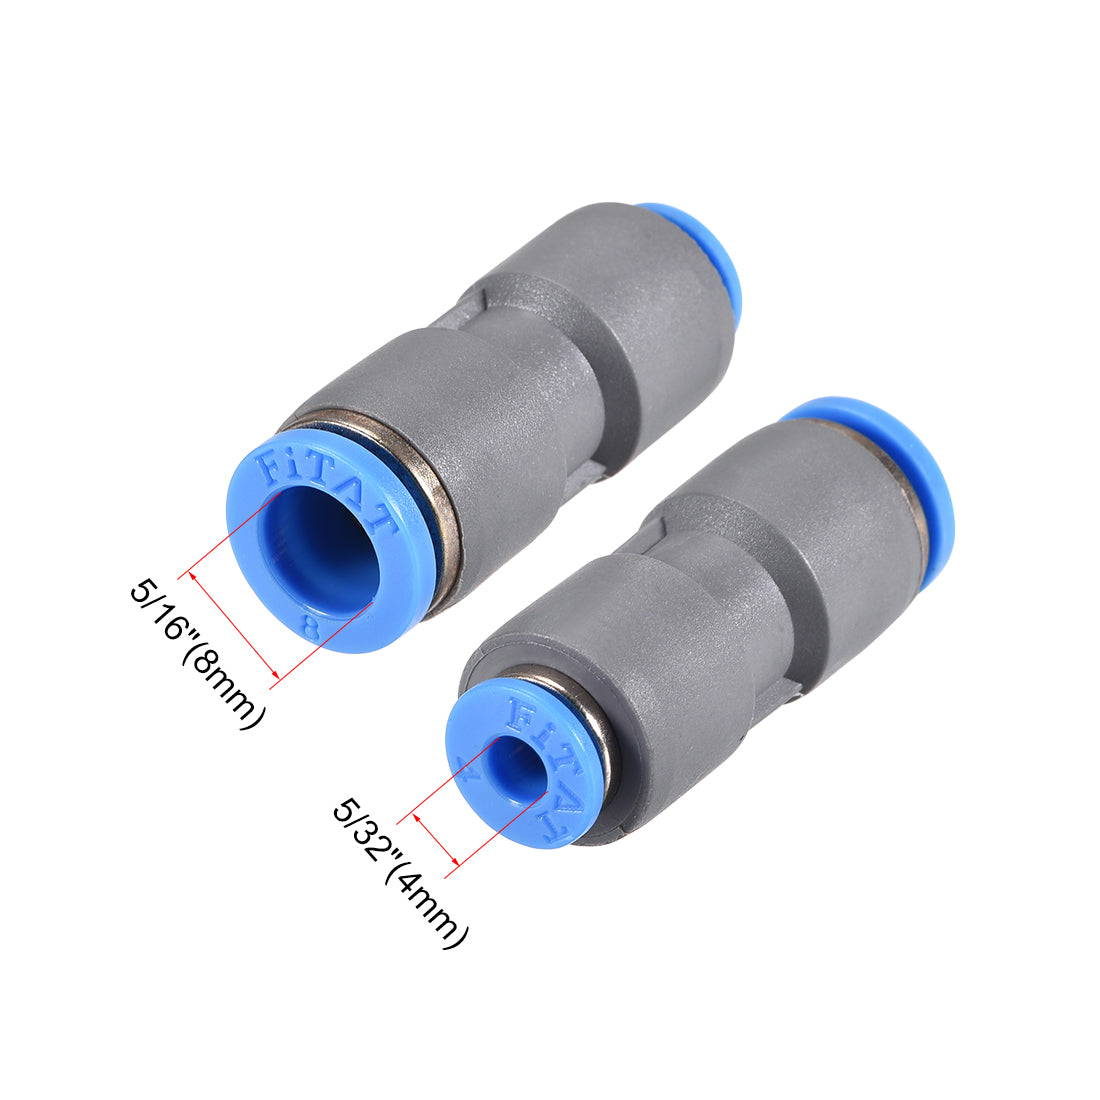 uxcell Uxcell Straight Push to Connector Reducer Fitting 8mm to 4mm Quick Release Pneumatic Connector Plastic Union Pipe Tube Fitting Grey 5Pcs